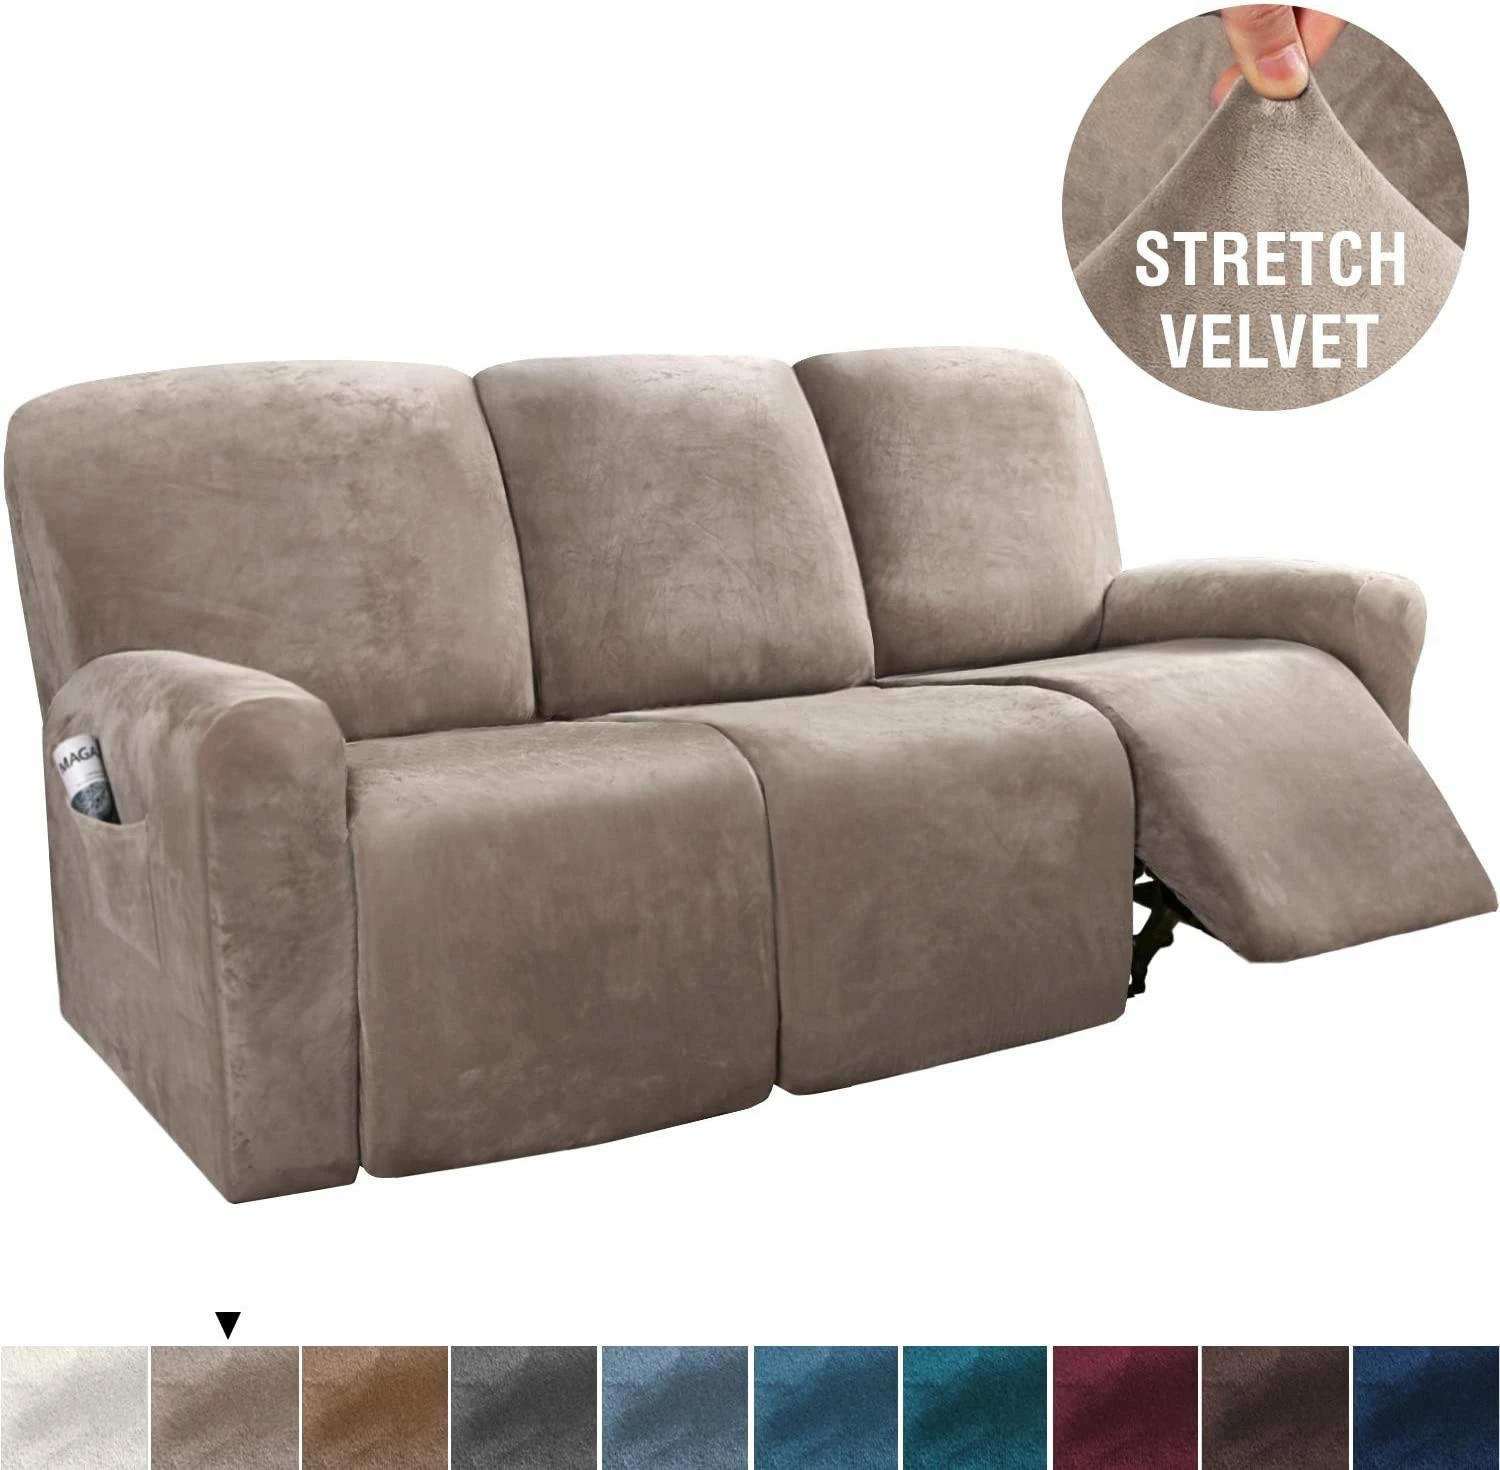 New Hot Sale Stretch Recliner Slipcovers 8 Pieces Recliner Covers Luxury Velvet 3 Seat Recliner Sofa Cover